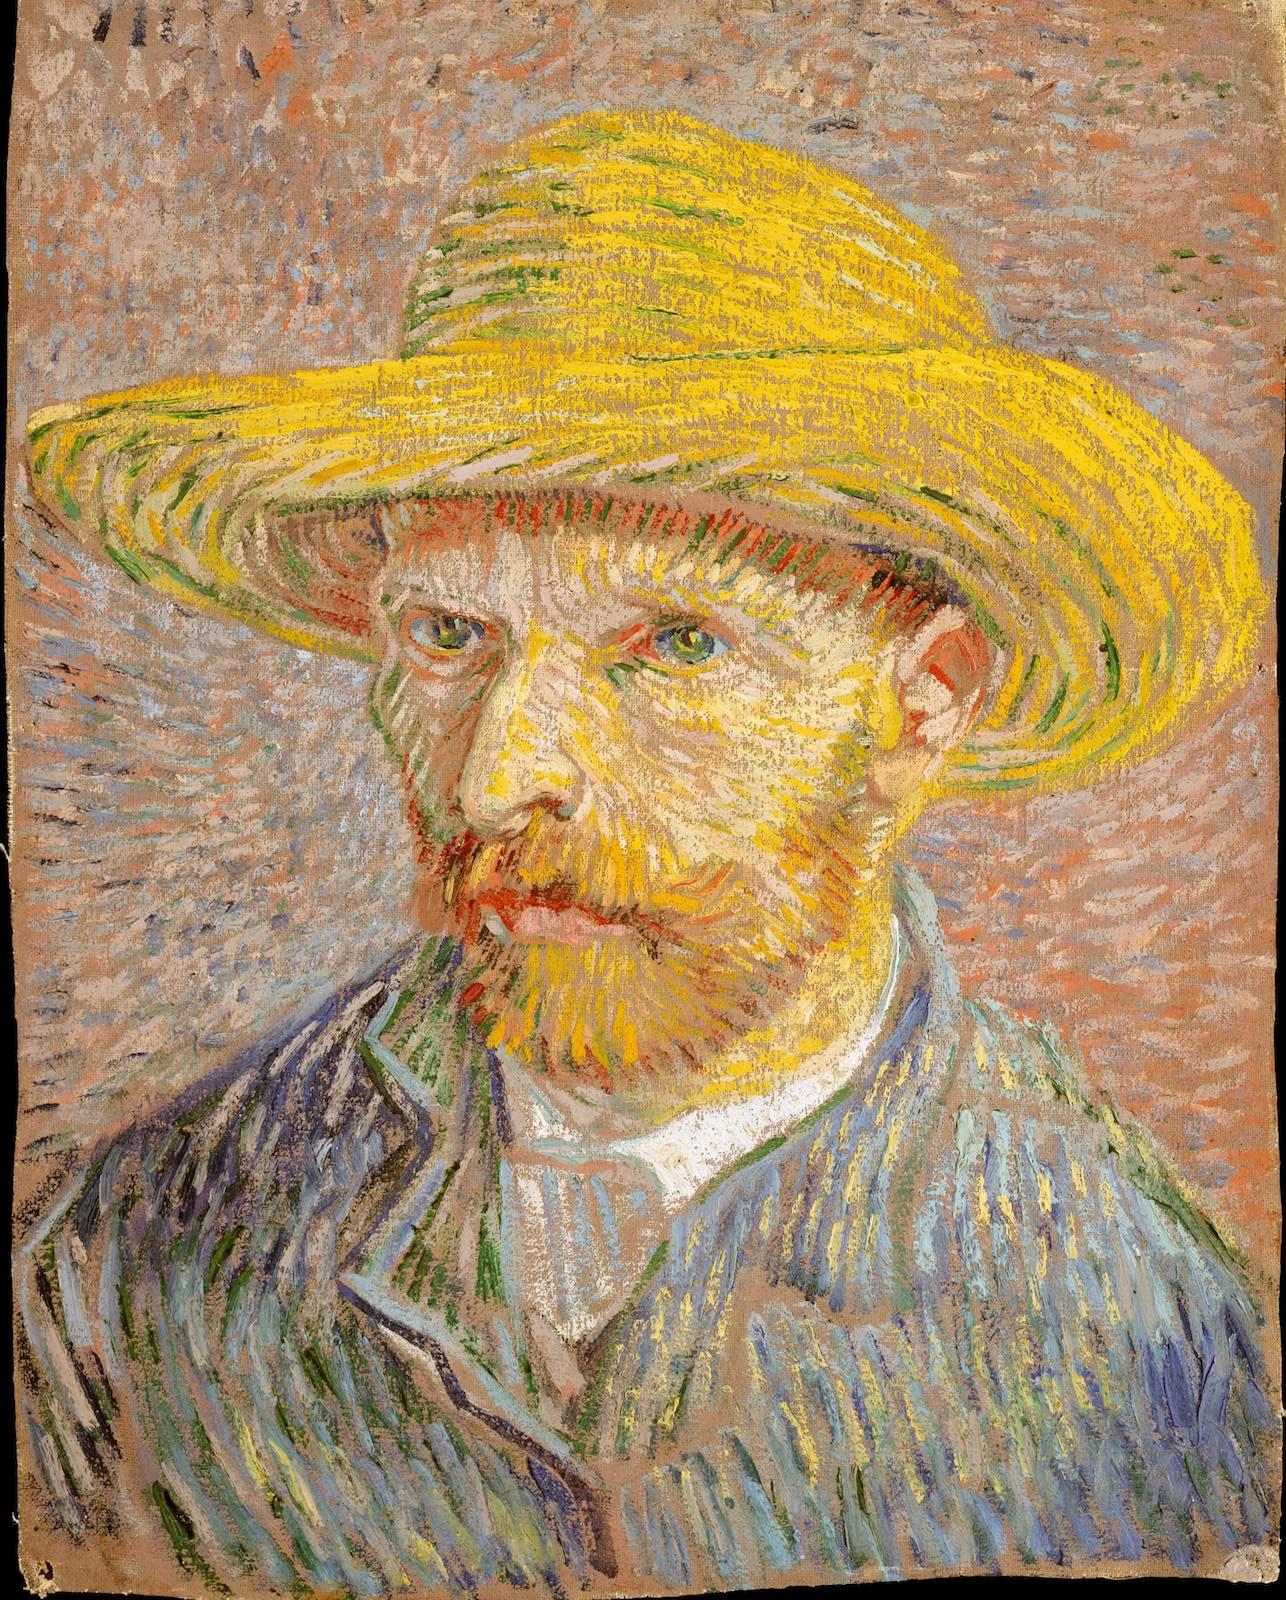 Van Gogh painted The Potato Peeler at Nuenen, The Netherlands, in February–March 1885. Later, in Paris, in summer 1887, he turned the canvas over and painted Self-Portrait with a Straw Hat on the other side.